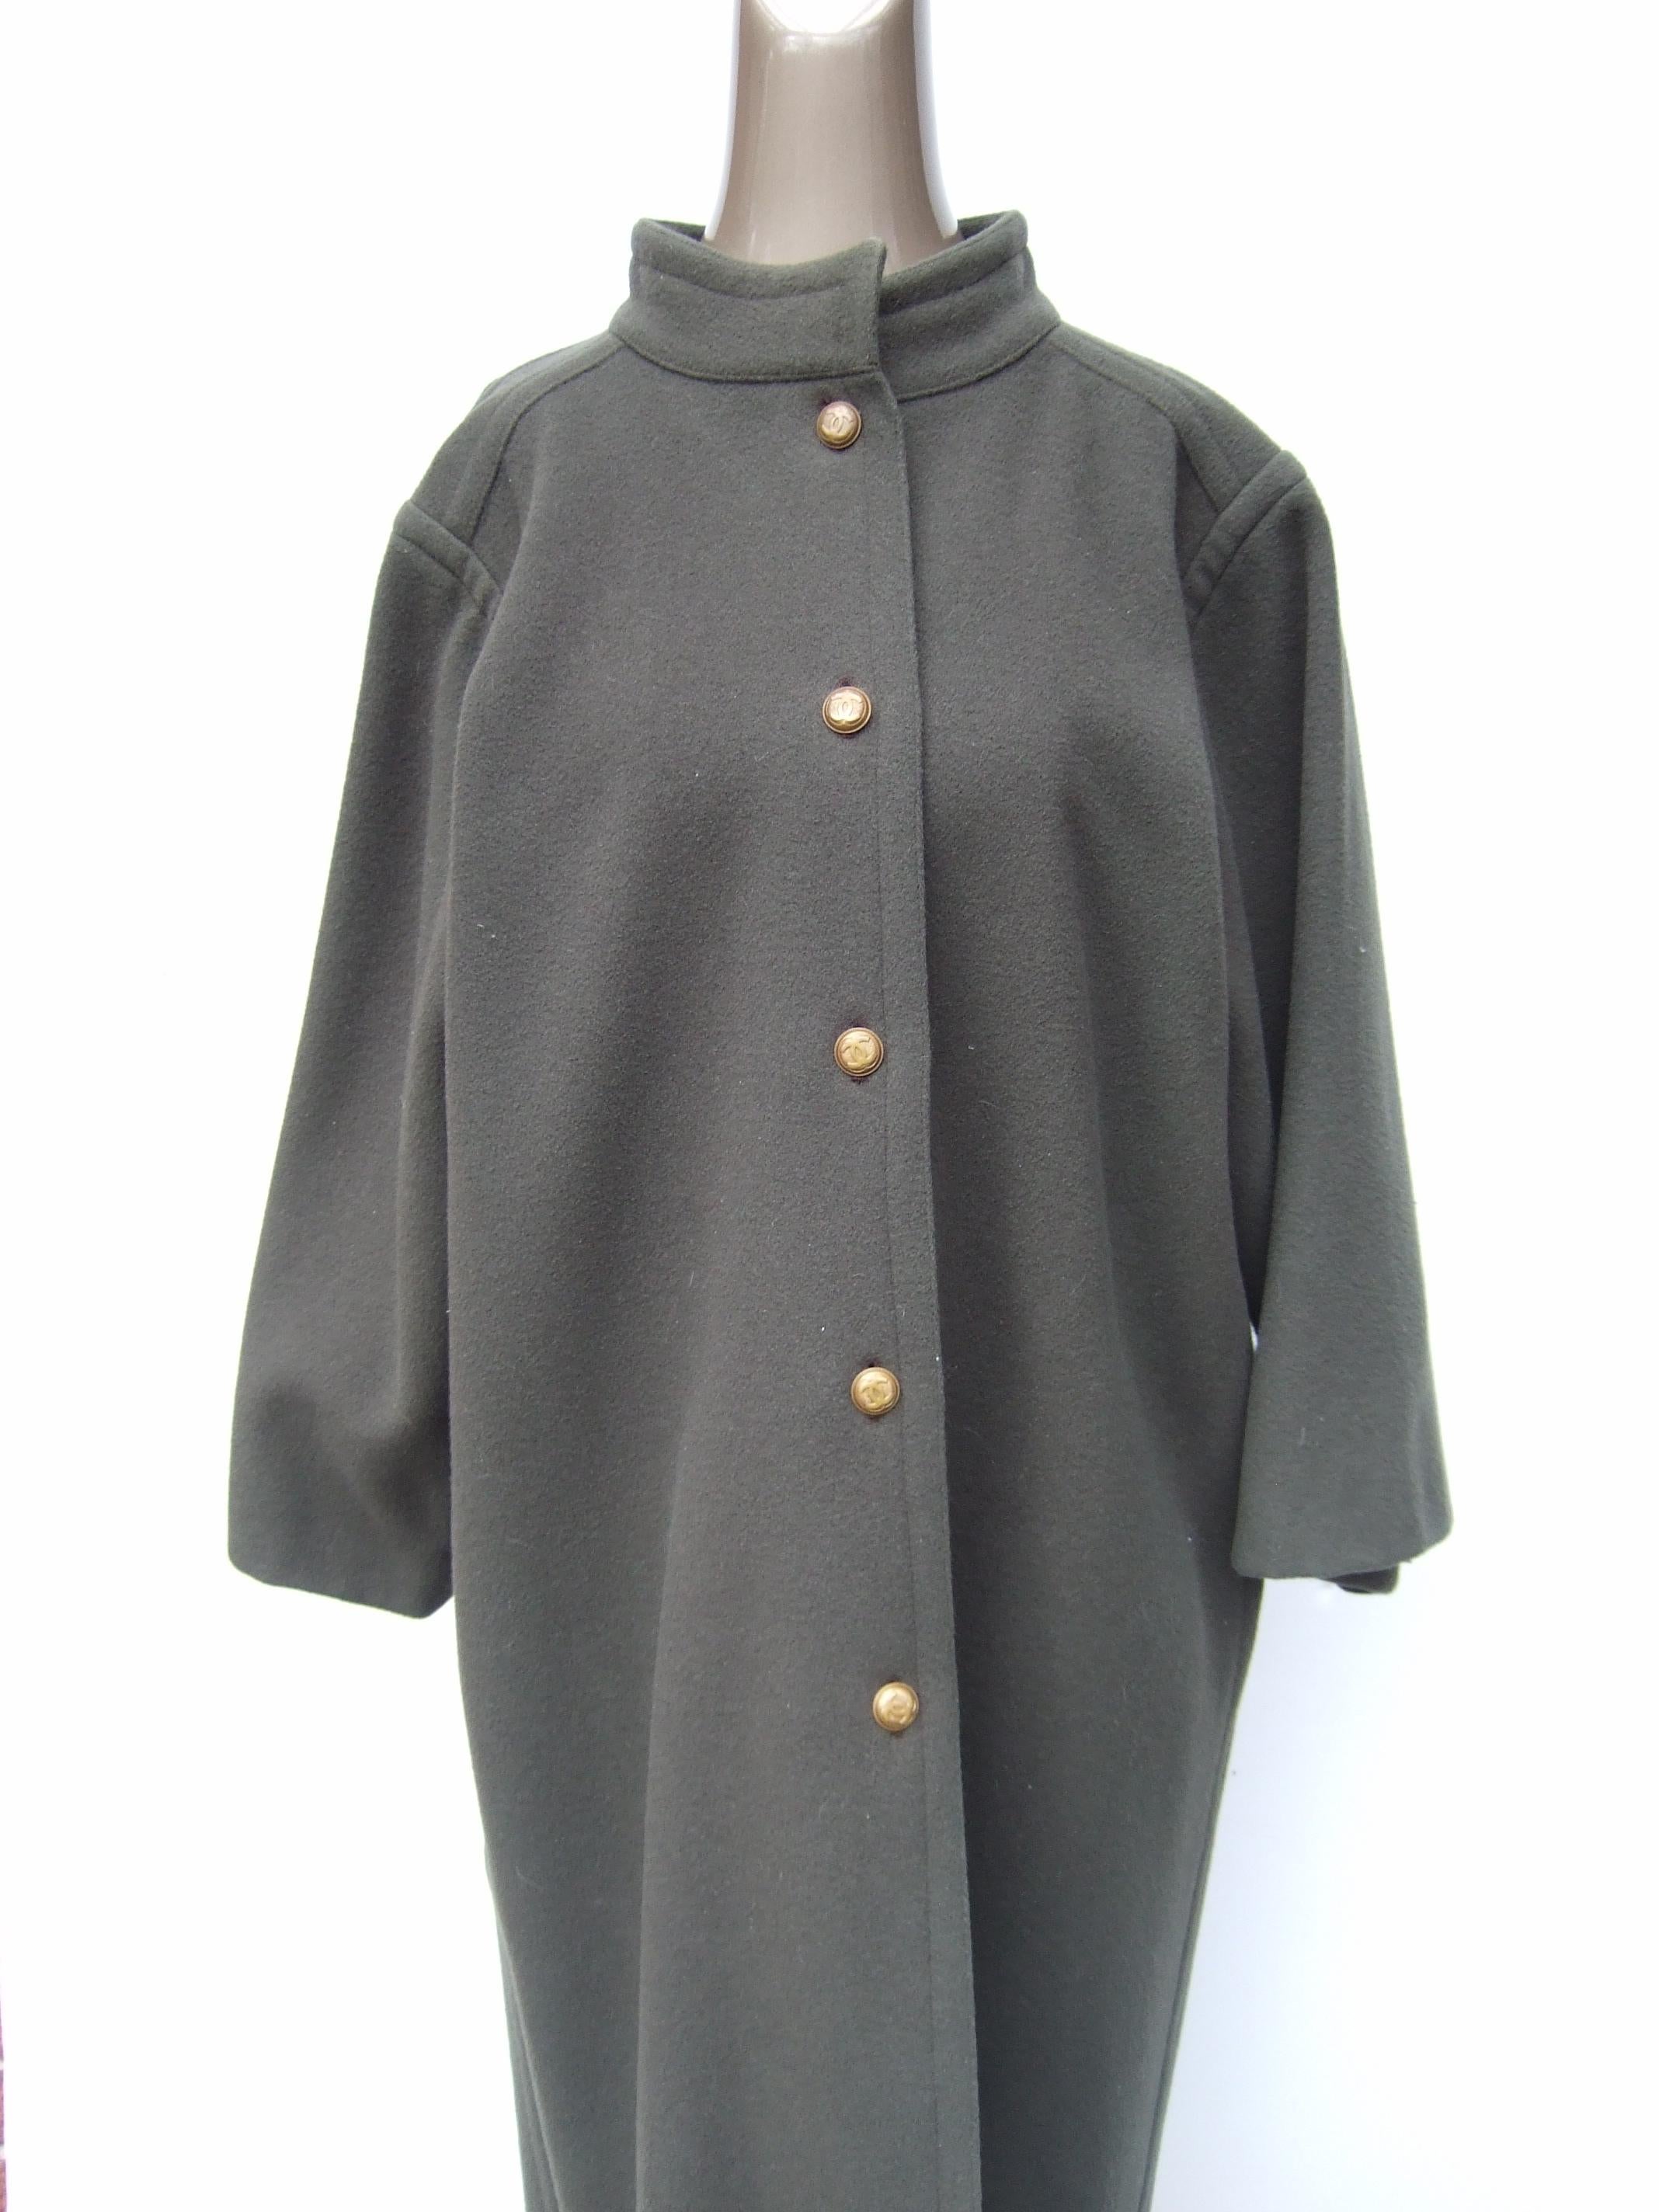 CHANEL Creations Muted Gray - Green Wool Coat with C.C. Buttons c 1980s For Sale 8